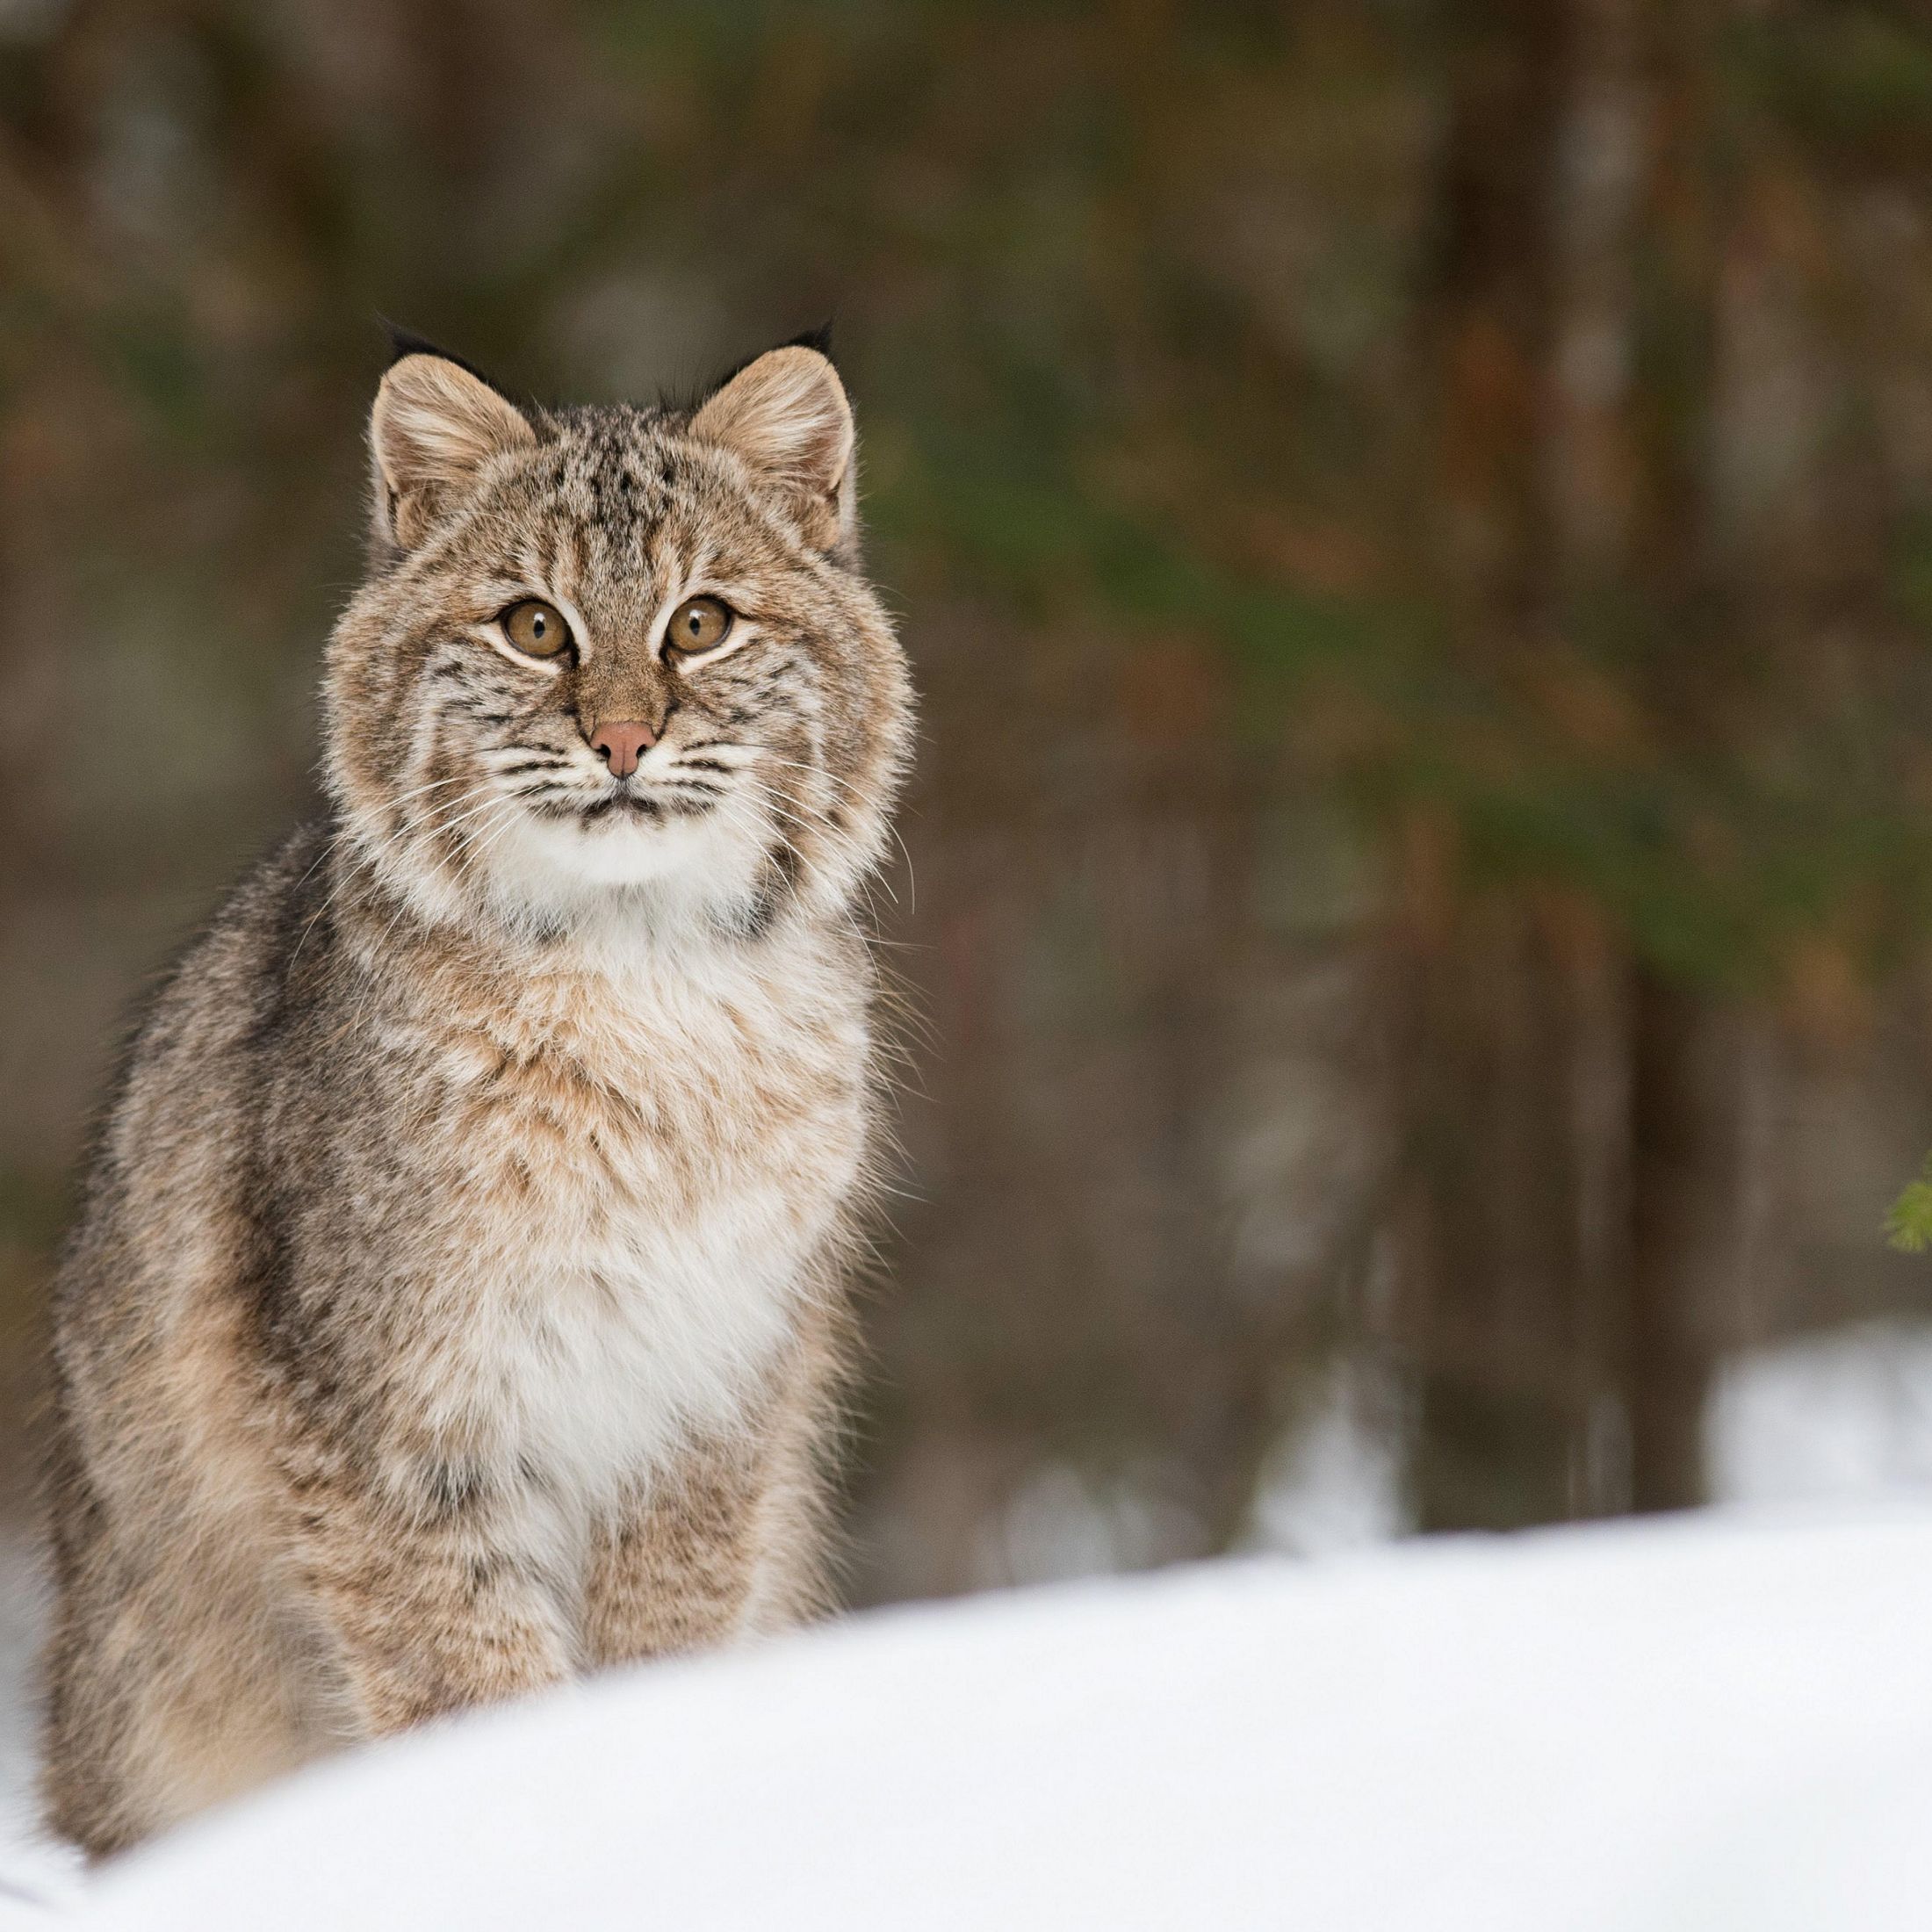 Bobcat staring at the camera in a snowy scene in Vermont.